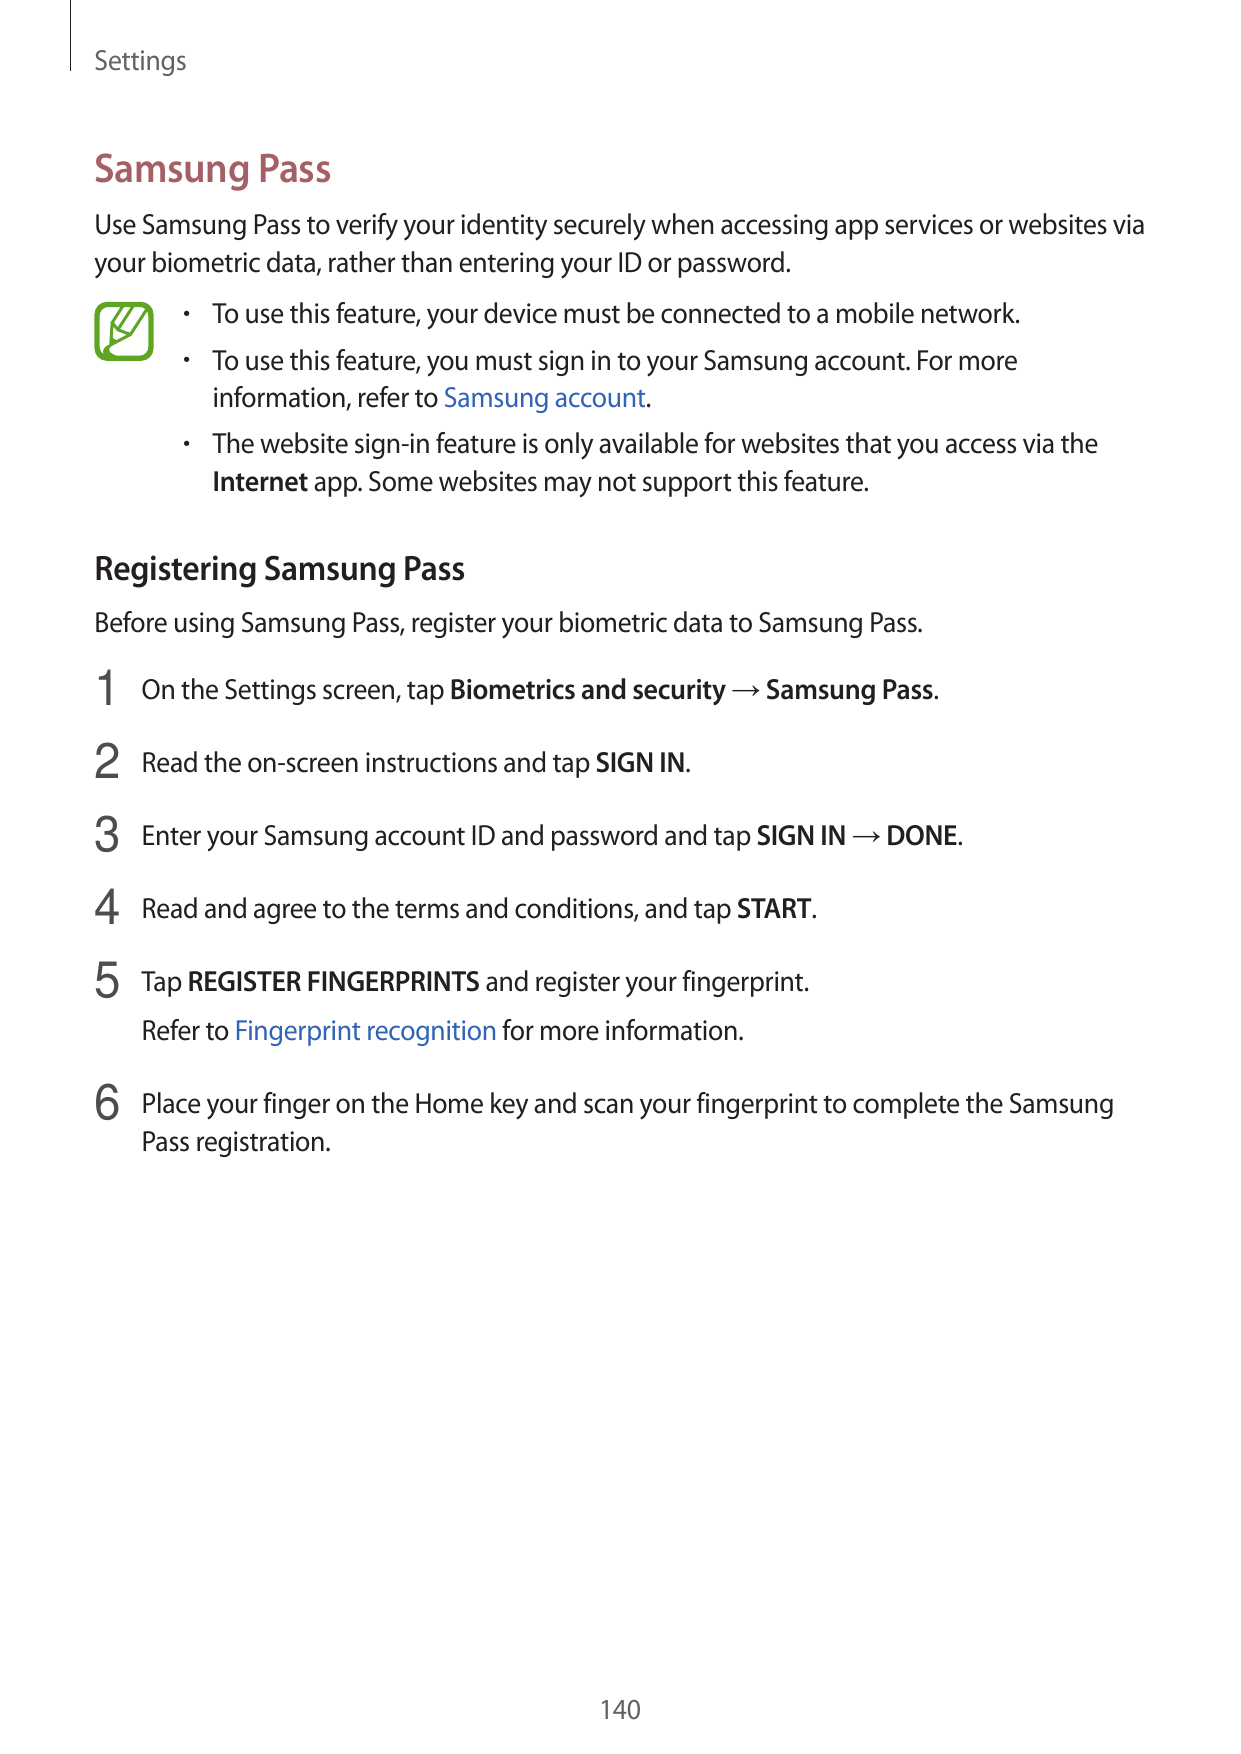 SettingsSamsung PassUse Samsung Pass to verify your identity securely when accessing app services or websites viayour biometric 